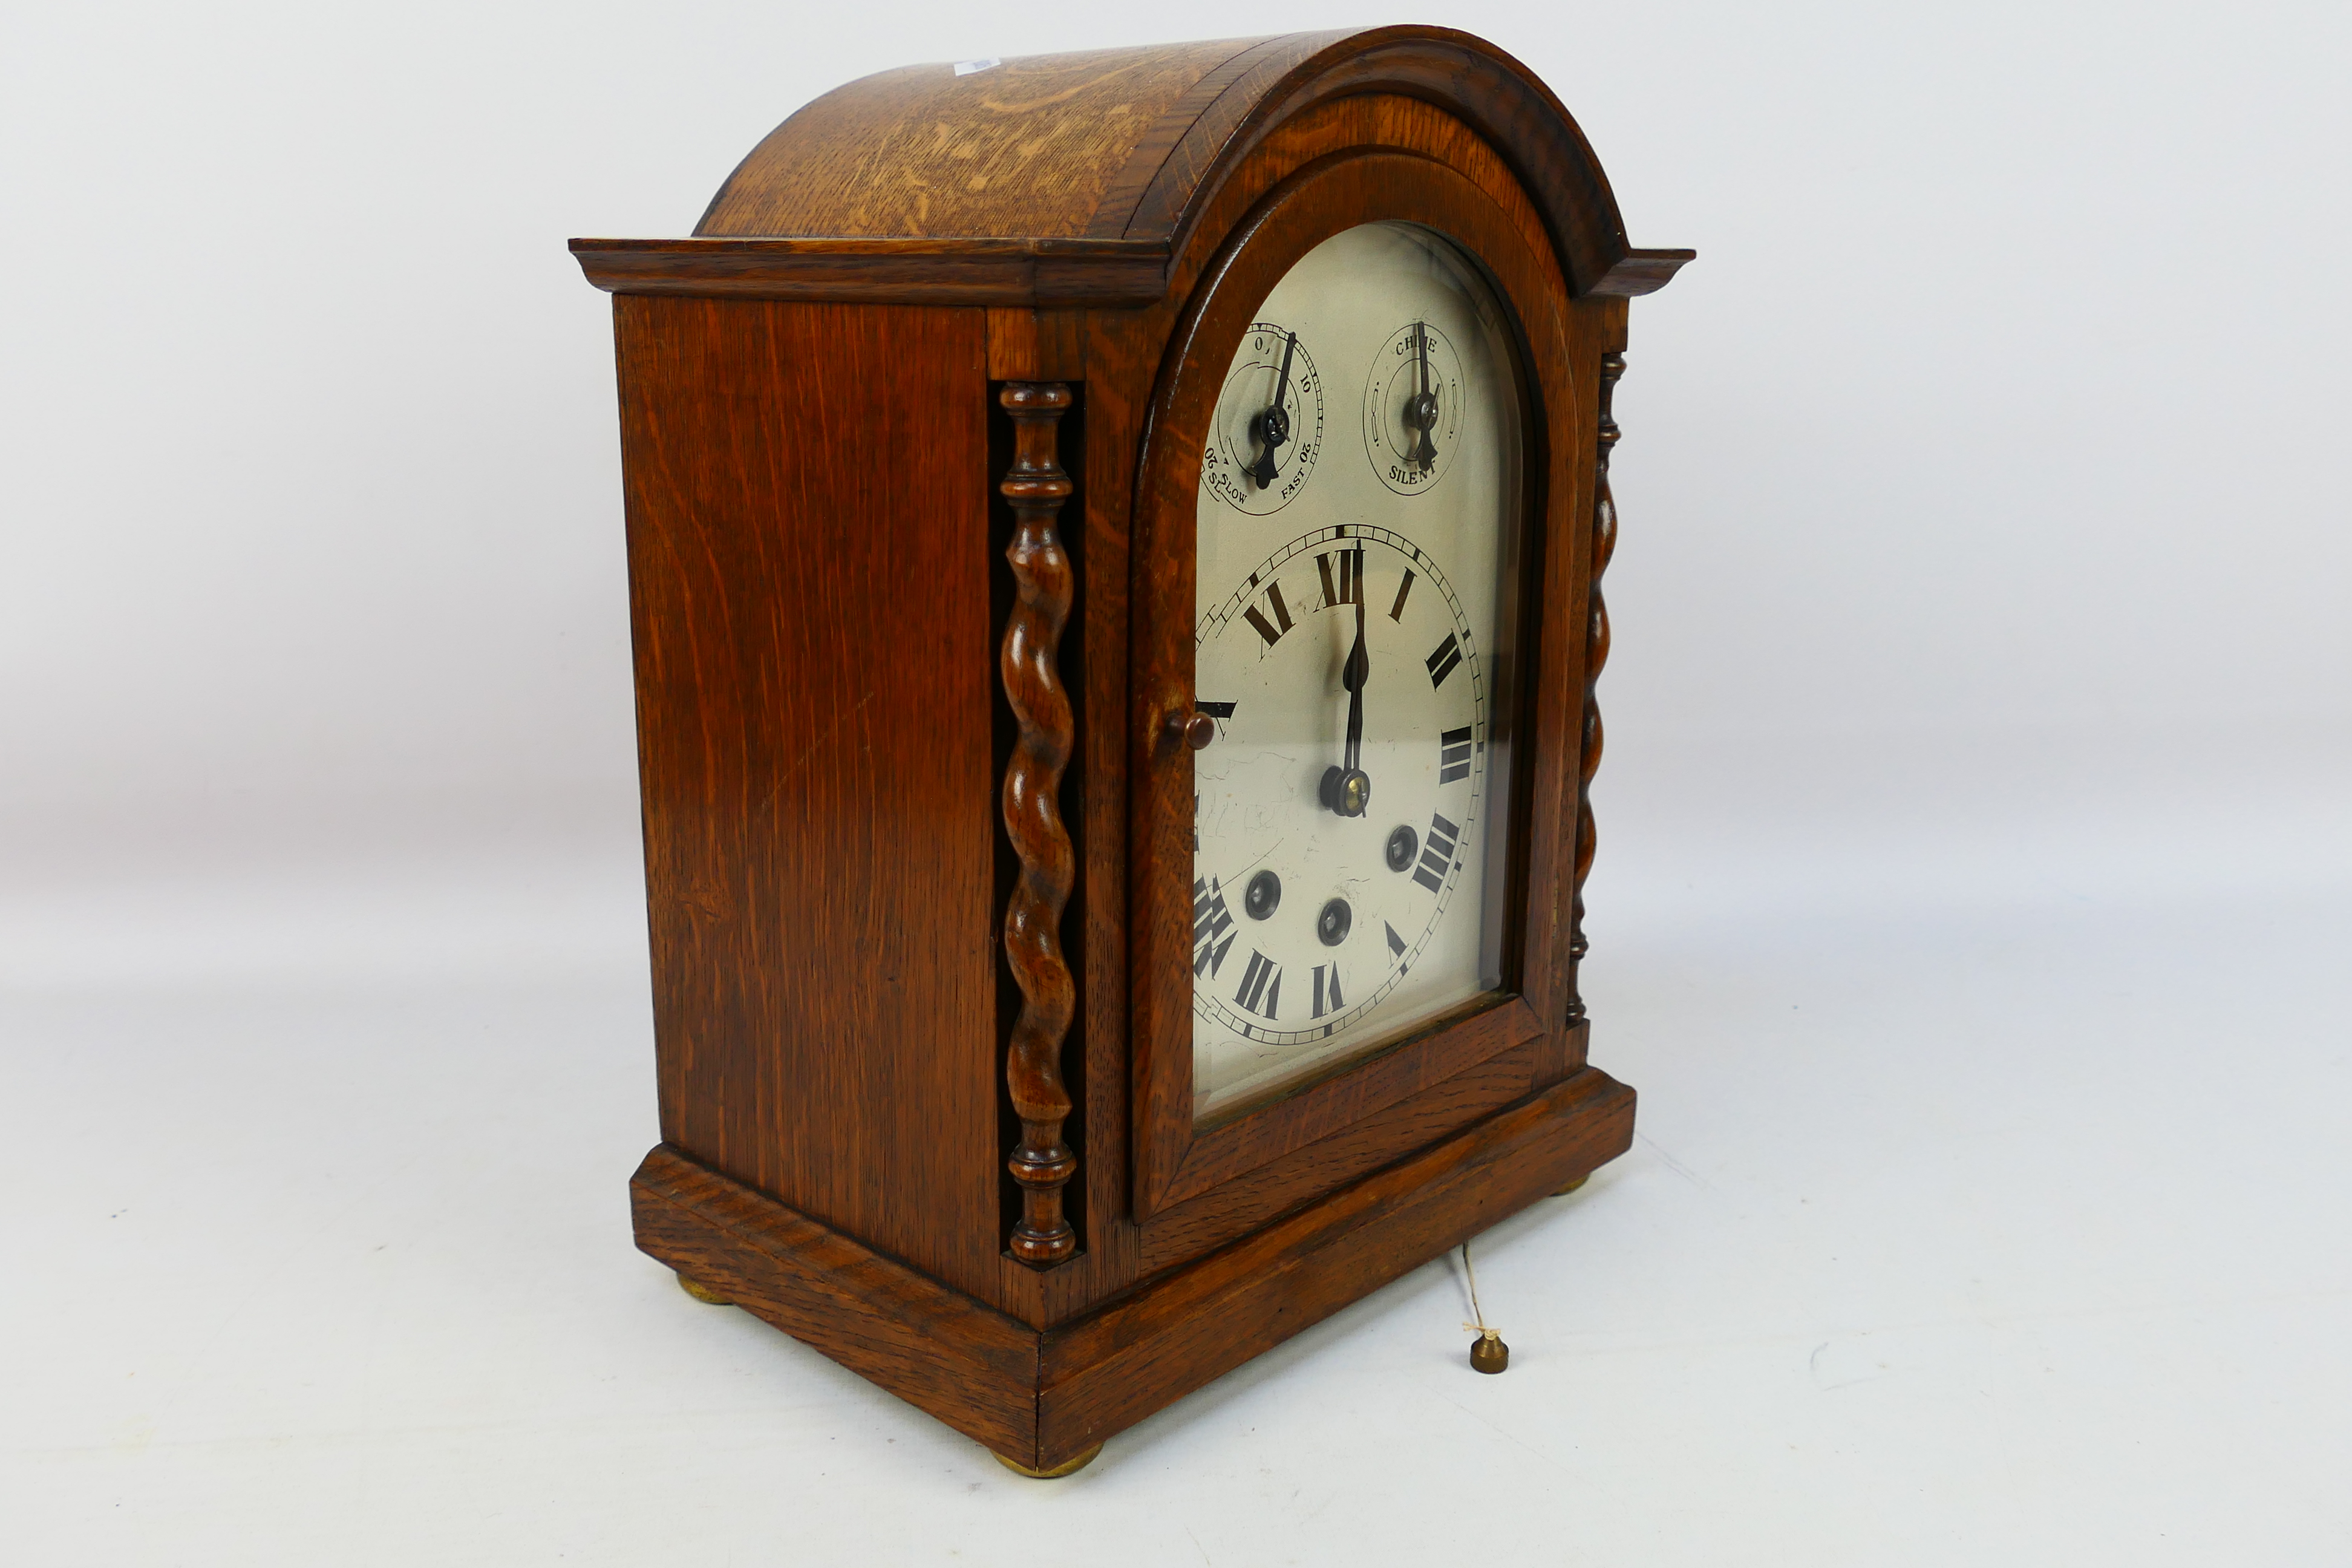 An early 20th century oak cased Westminster chiming mantel clock, the case of a medium oak colour, - Image 6 of 9